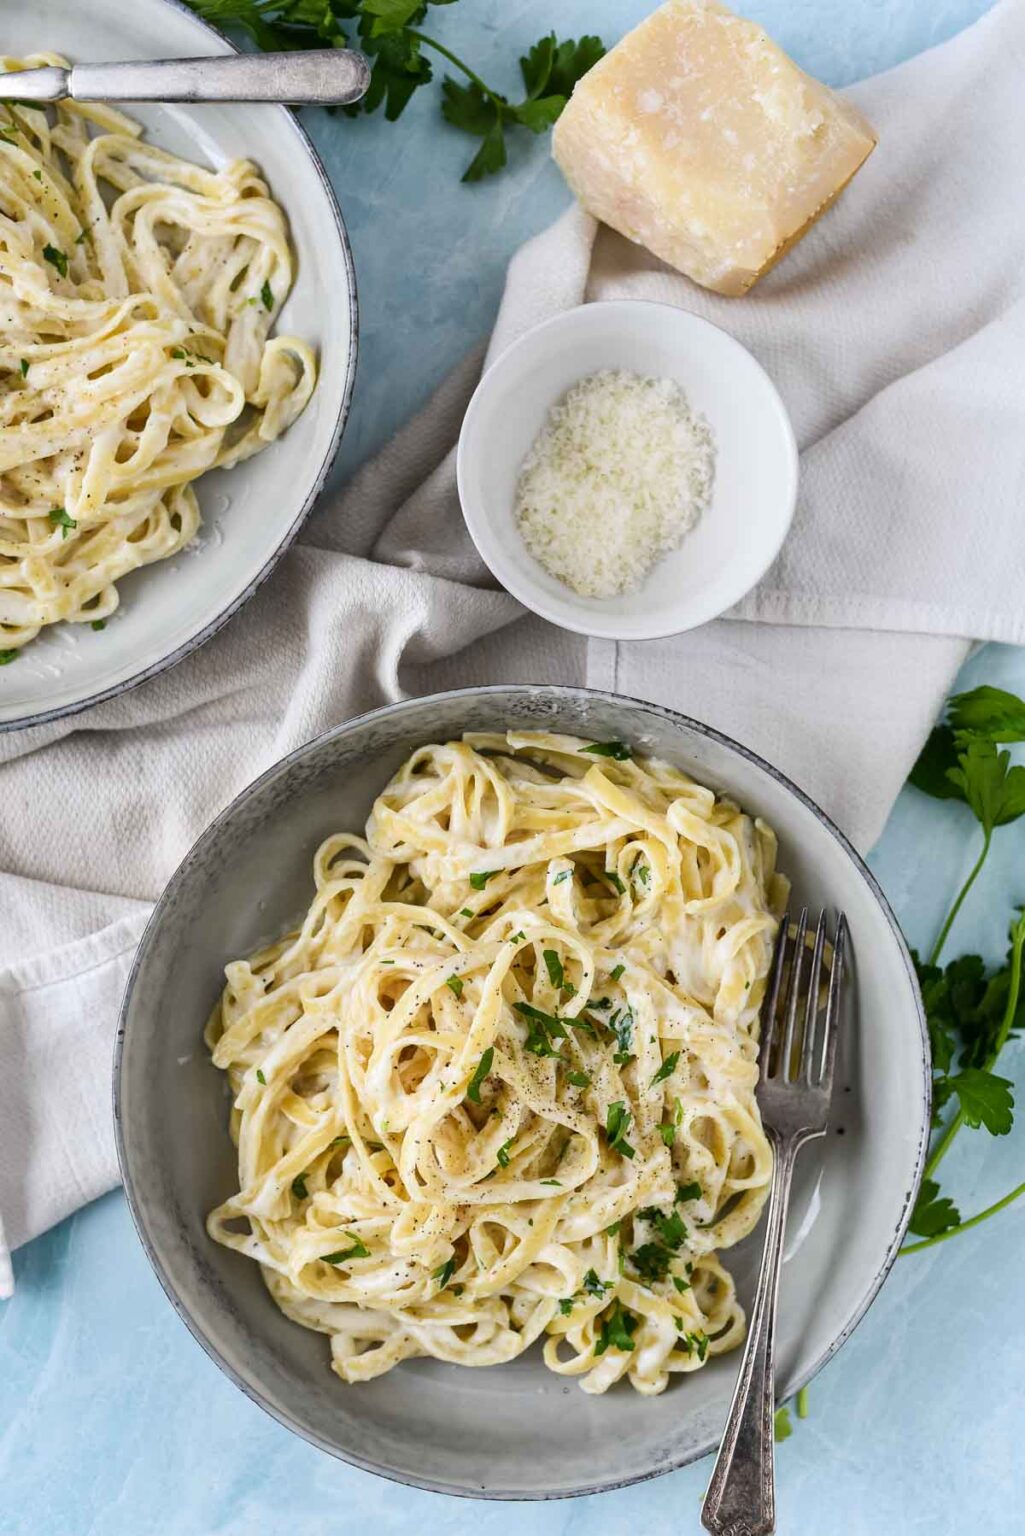 Homemade Alfredo Sauce with Milk - The Gingered Whisk